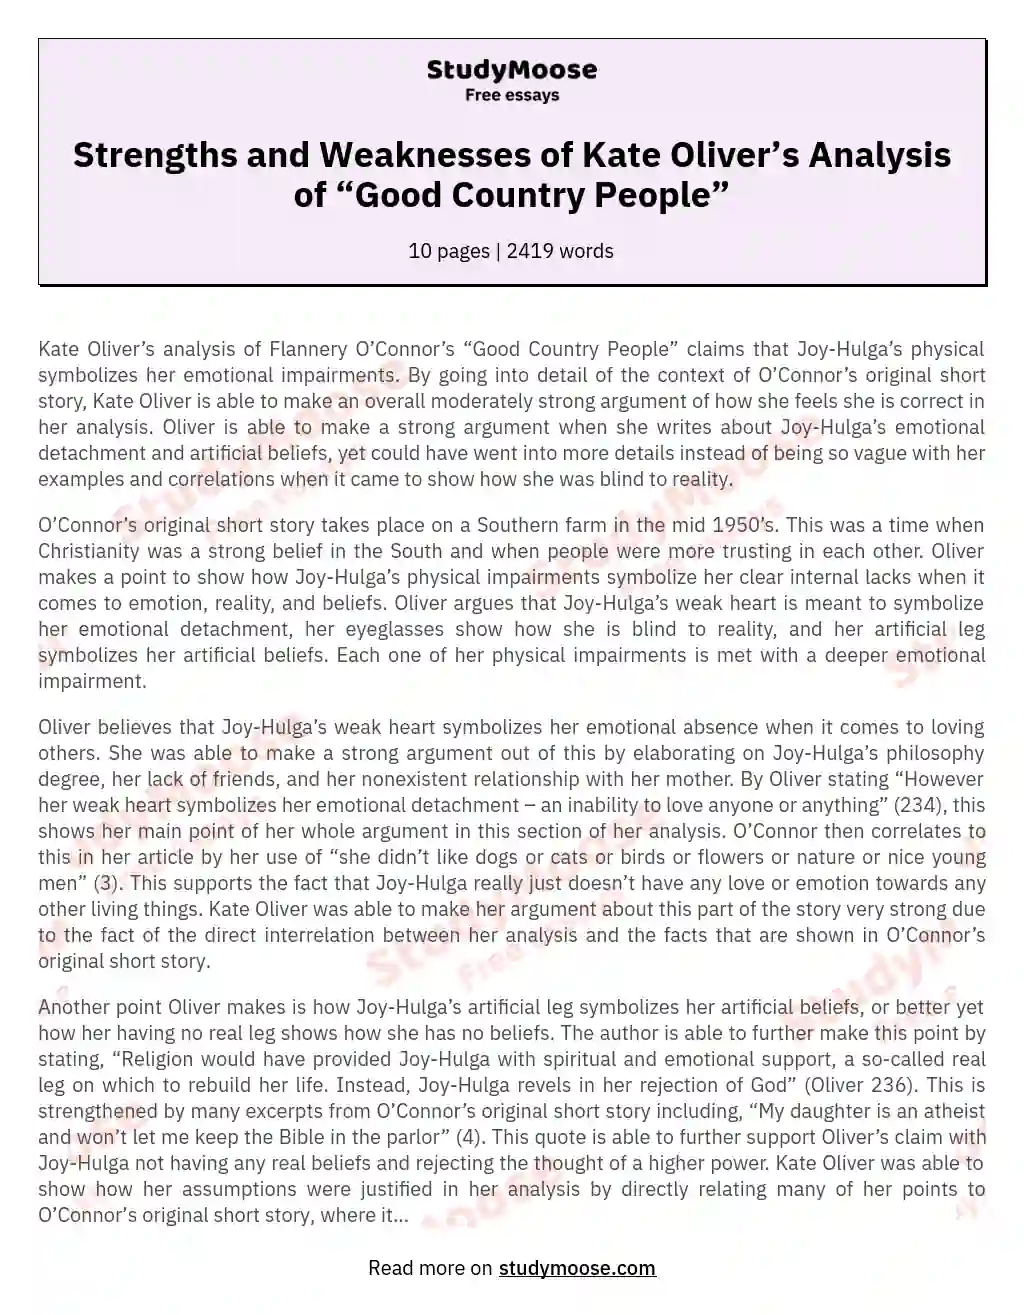 Strengths and Weaknesses of Kate Oliver’s Analysis of “Good Country People” essay